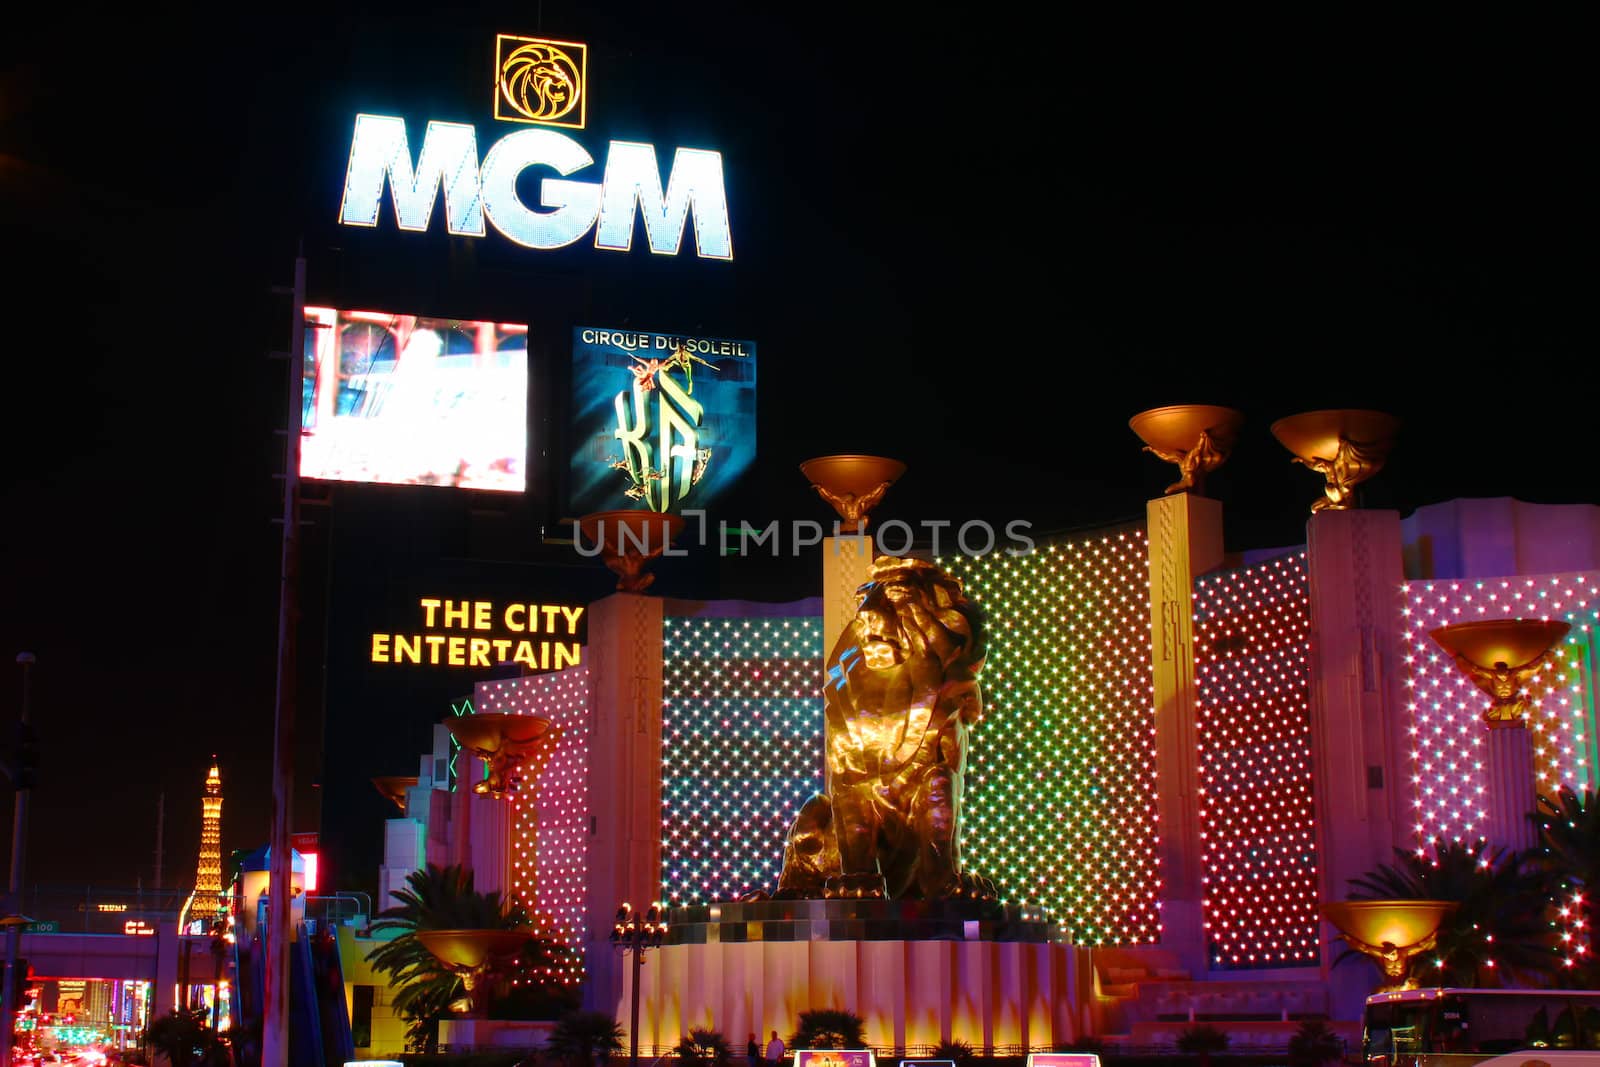 Las Vegas, USA - October 29, 2011: The MGM Grand Las Vegas is one of the largest hotels in the world.  The main sign on Las Vegas Boulevard and the bronze Leo the Lion statue are seen here.